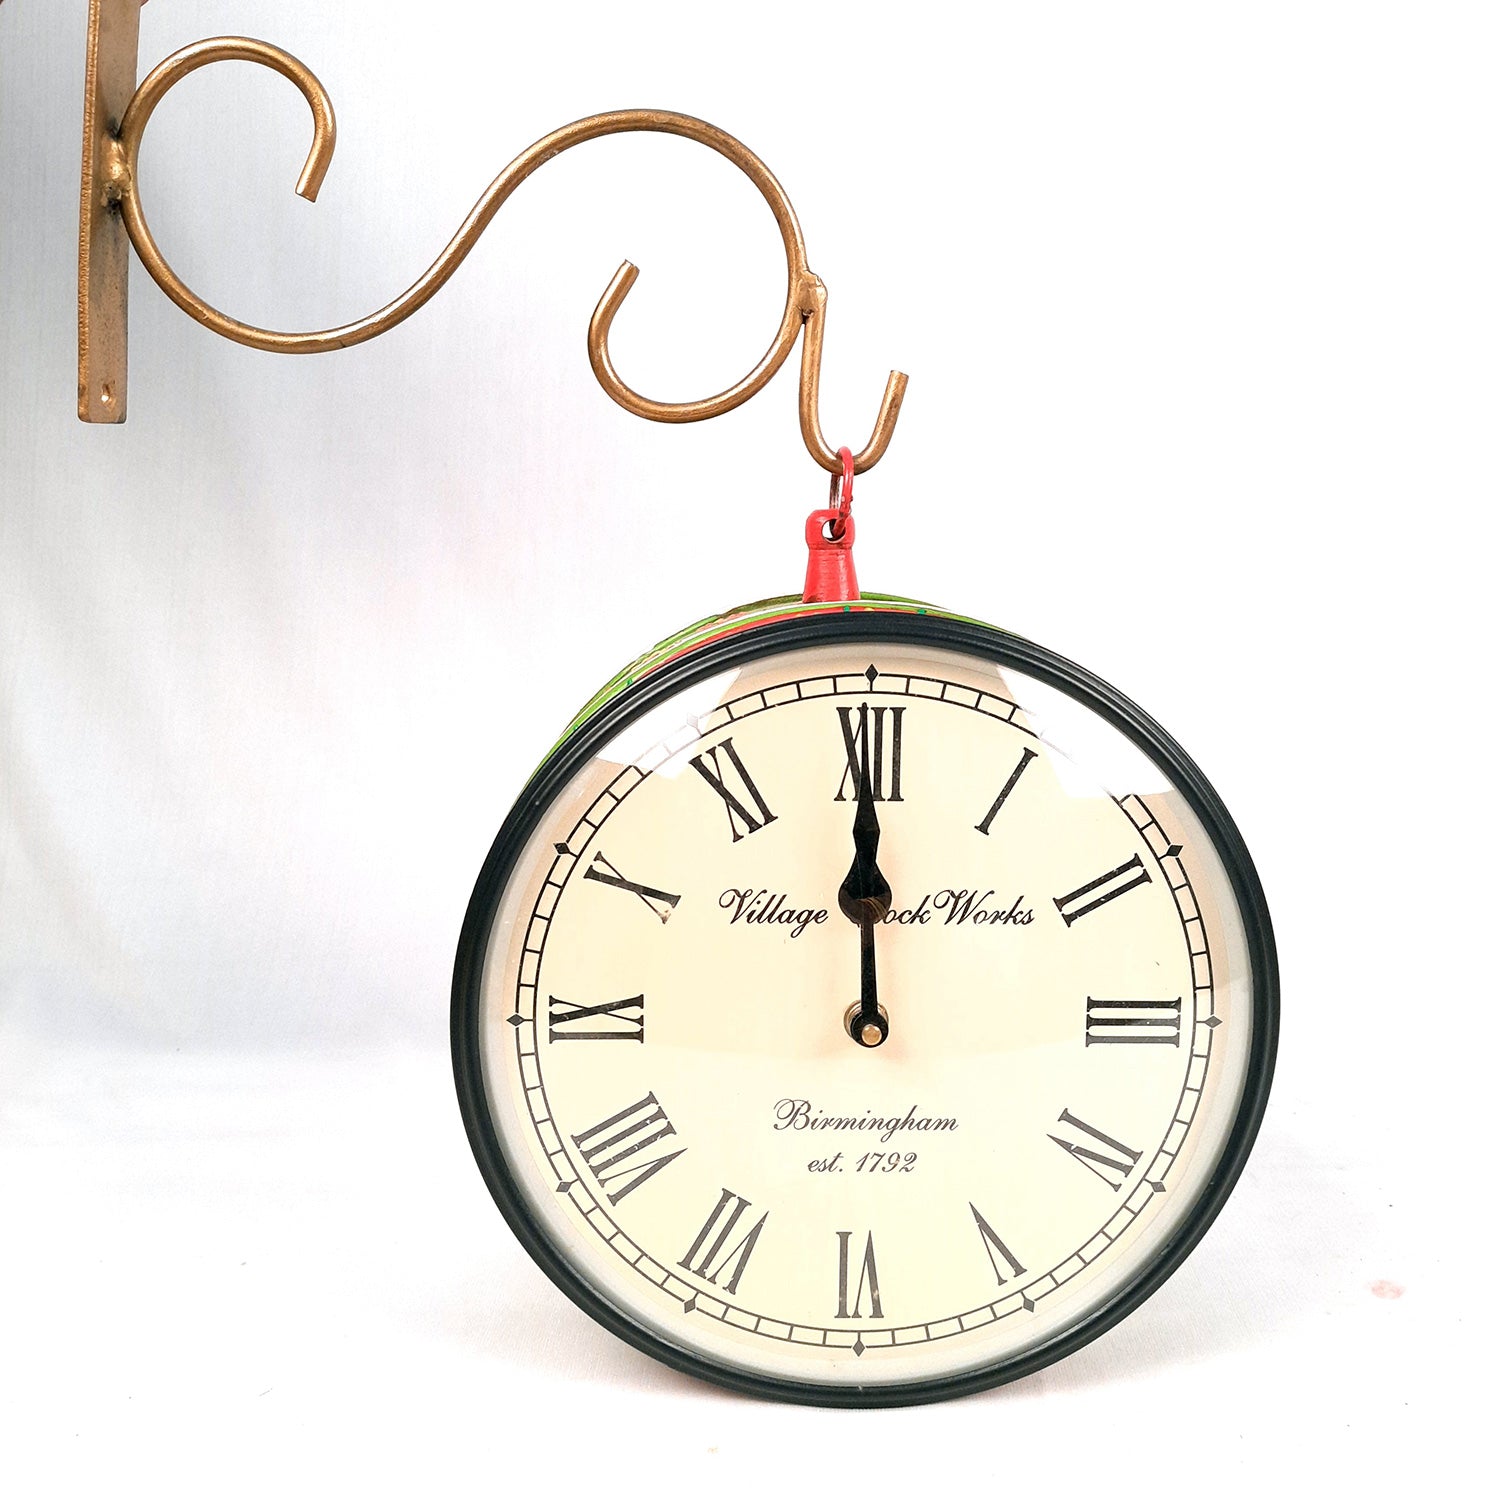 Victorian Station Clock | Vintage Railway Clocks - Double Sided Platform Watch | Antique Wall Hanging Clock - for Home, Living Room, Office Decor & Gifts - 10 inch - Apkamart